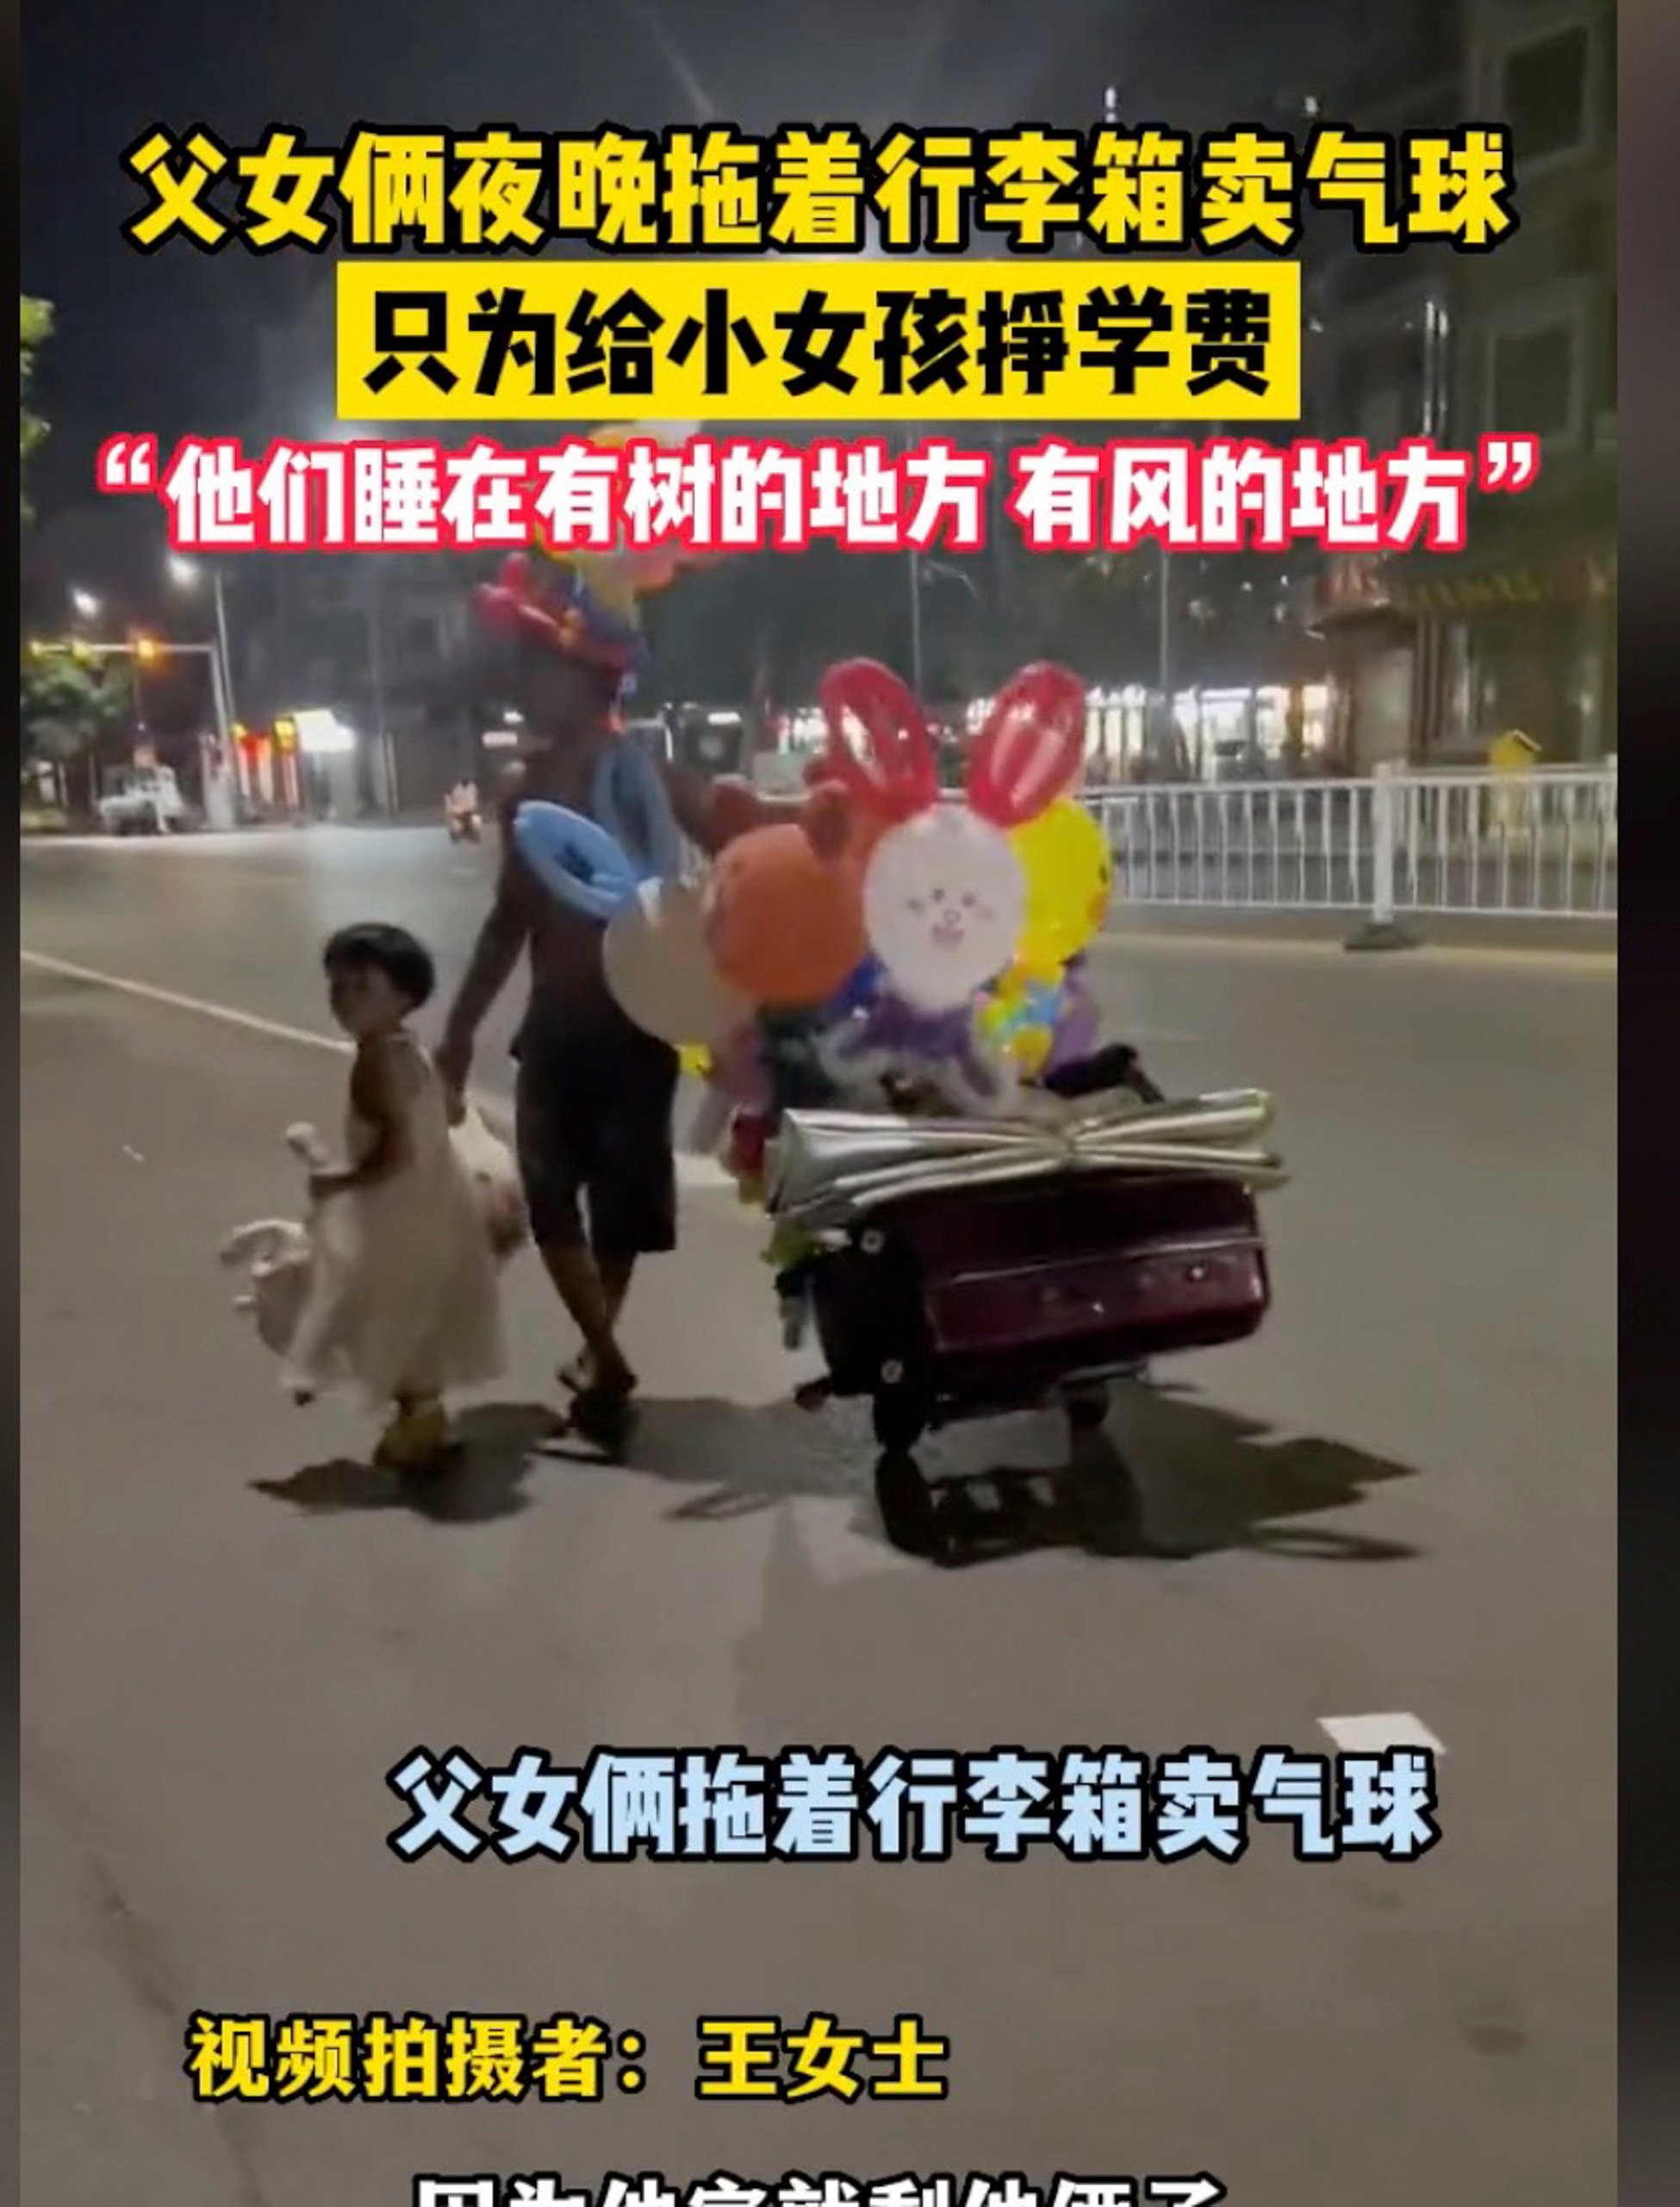 The image of the girl carrying her stuffed animal moved millions on the Chinese internet. Photo: Douyin